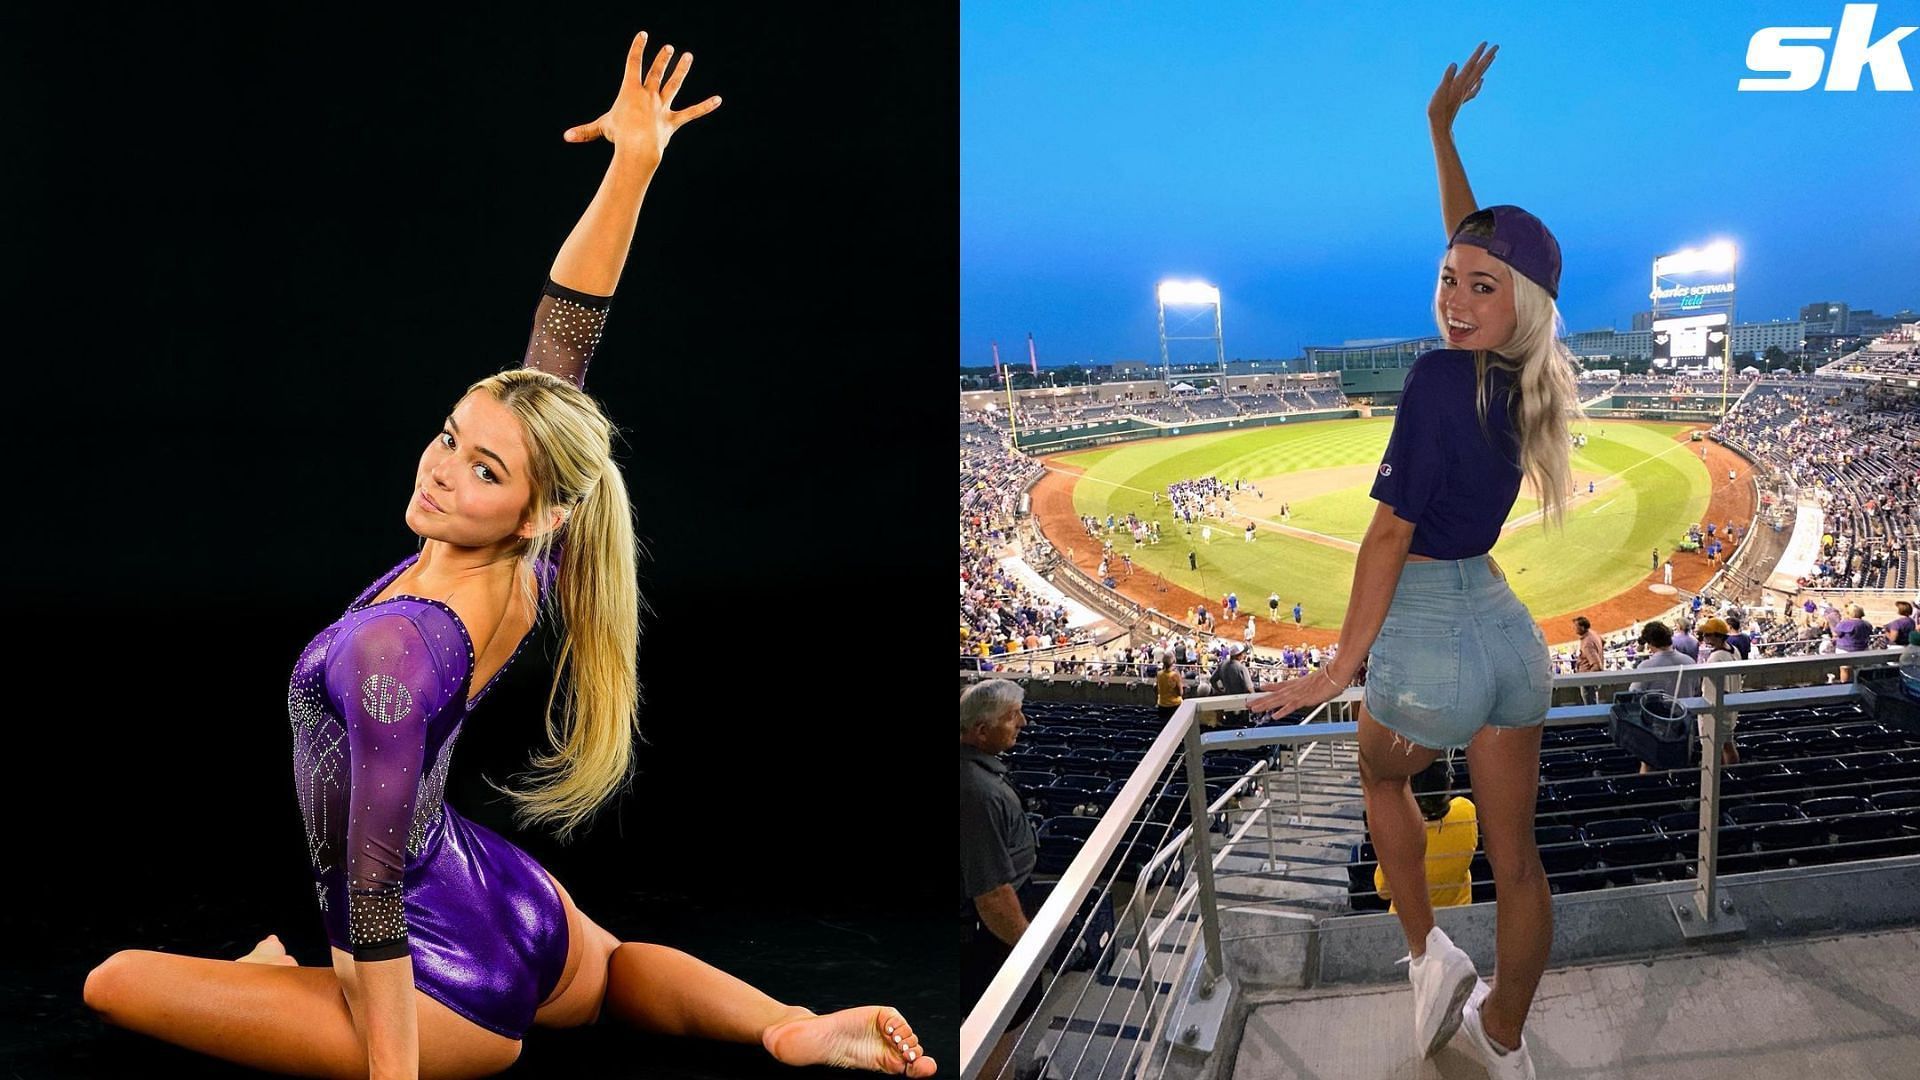 In Photos: Olivia Dunne exudes regal elegance as she dons LSU jersey while posing with a golden crown